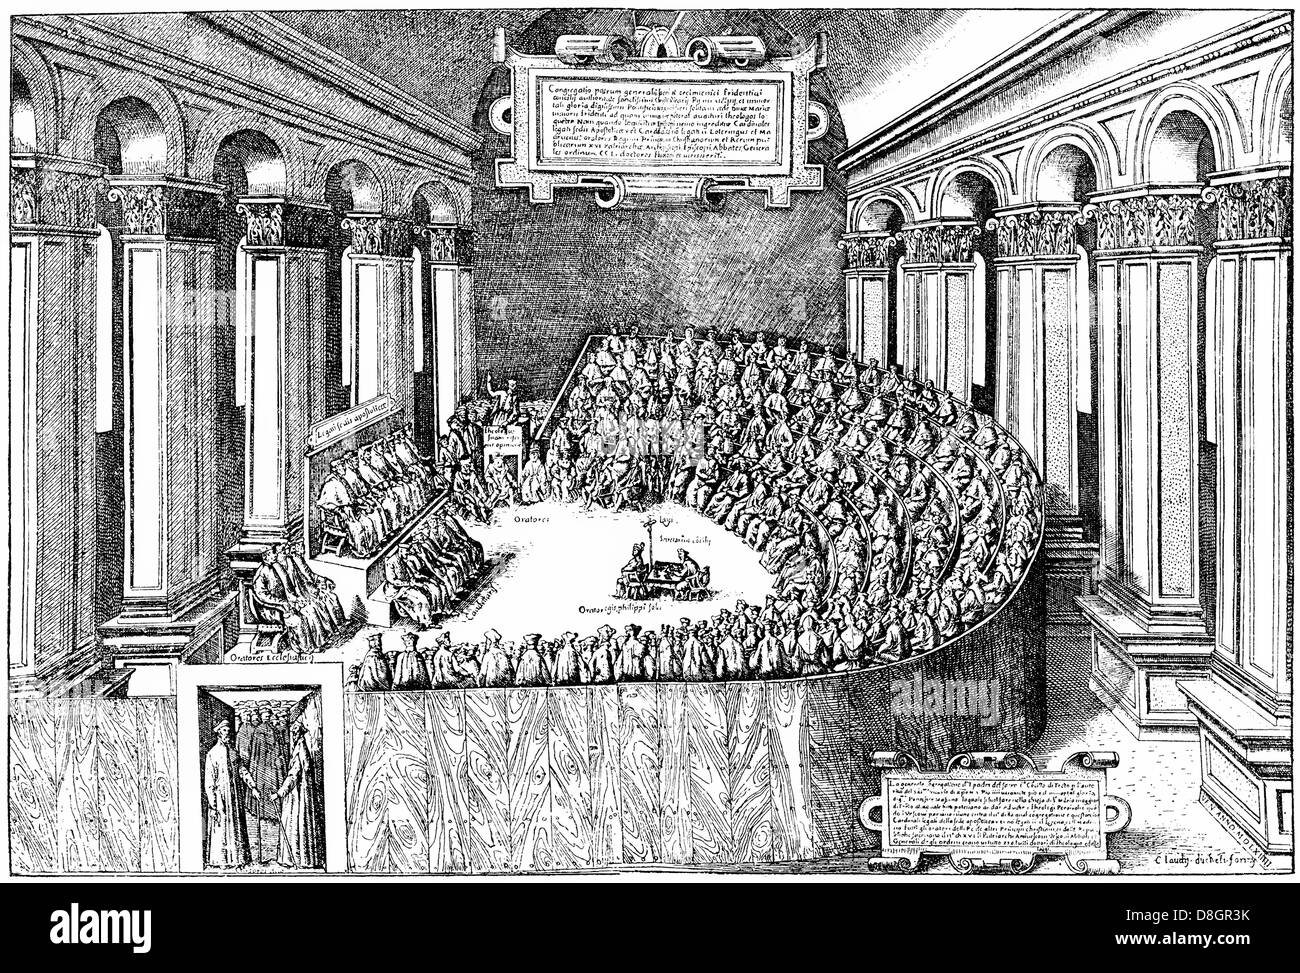 The Council of Trent or Concilium Tridentinum, an Ecumenical Council of the Roman Catholic Church, 16th century, Italy, Europe Stock Photo